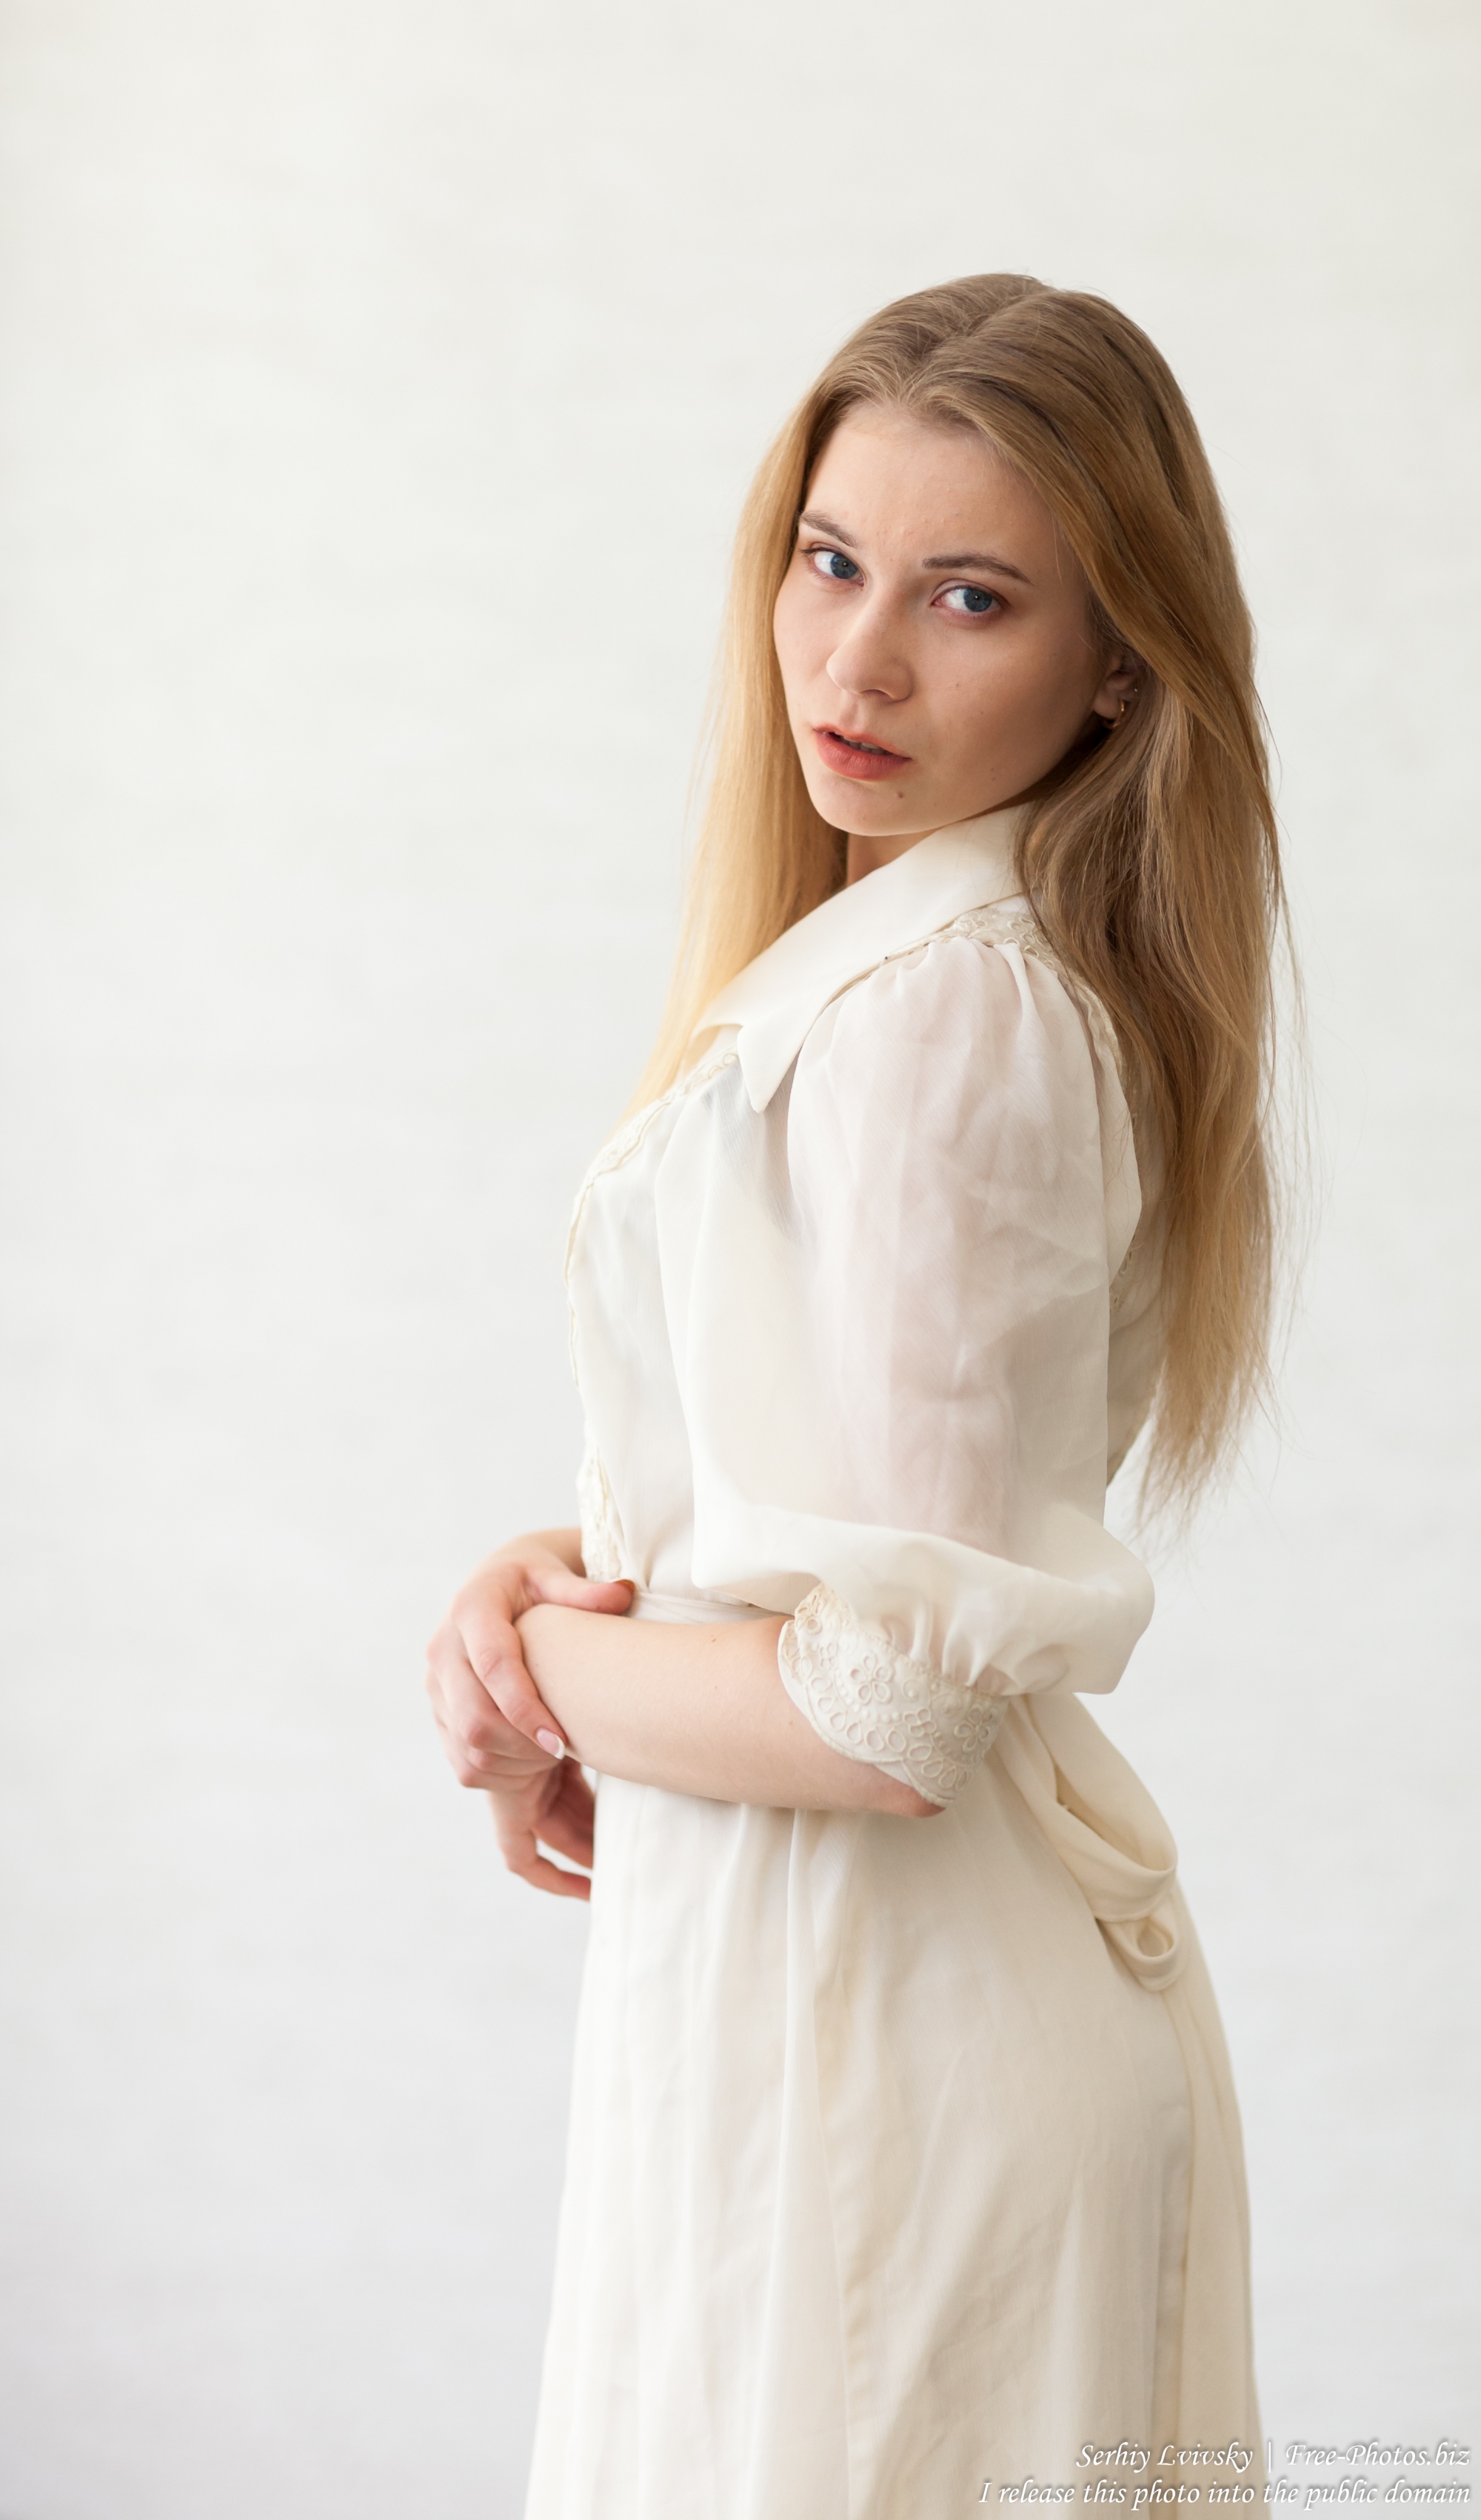 vladyslava_an_18-year-old_natural_blonde_girl_photographed_in_june_2017_by_serhiy_lvivsky_09